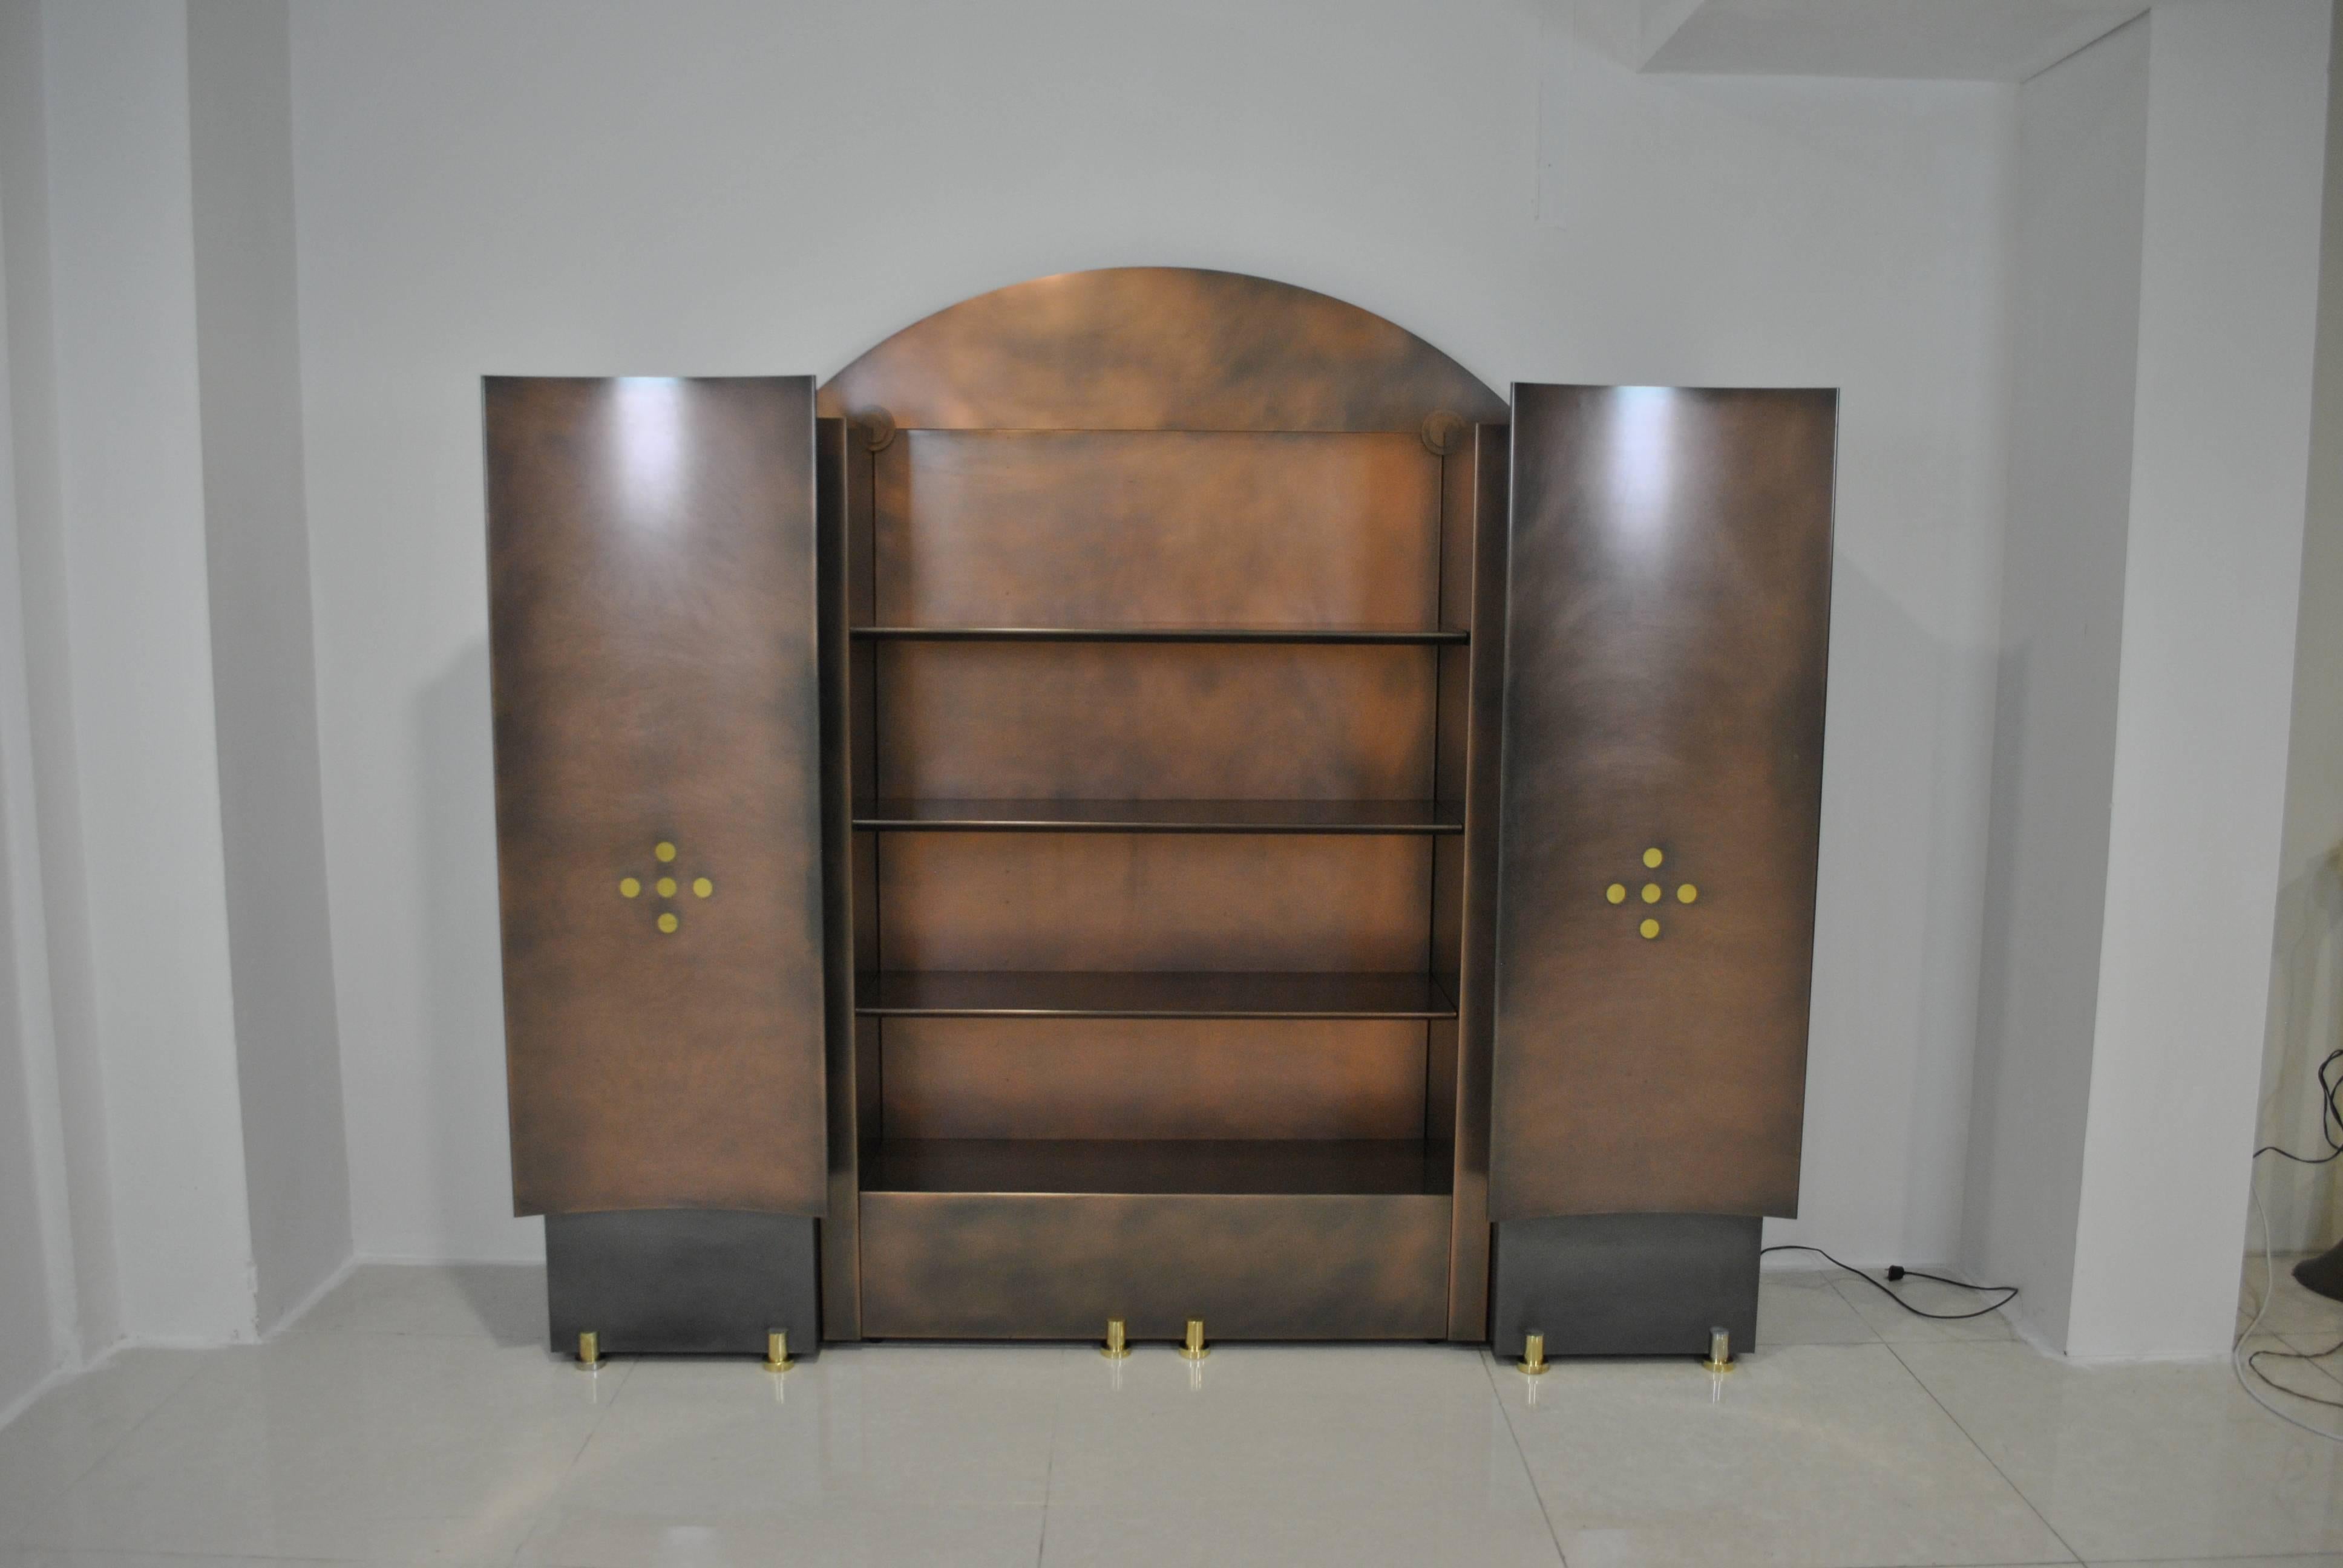 Spectacular and rare copper/bronze patina on steel wall unit or library by BelgoChrom/Dewulf Selection. This prestigious piece of furniture dates from the late 1980s.
A true Hollywood Regency highlight for your interior. The middle shelves have